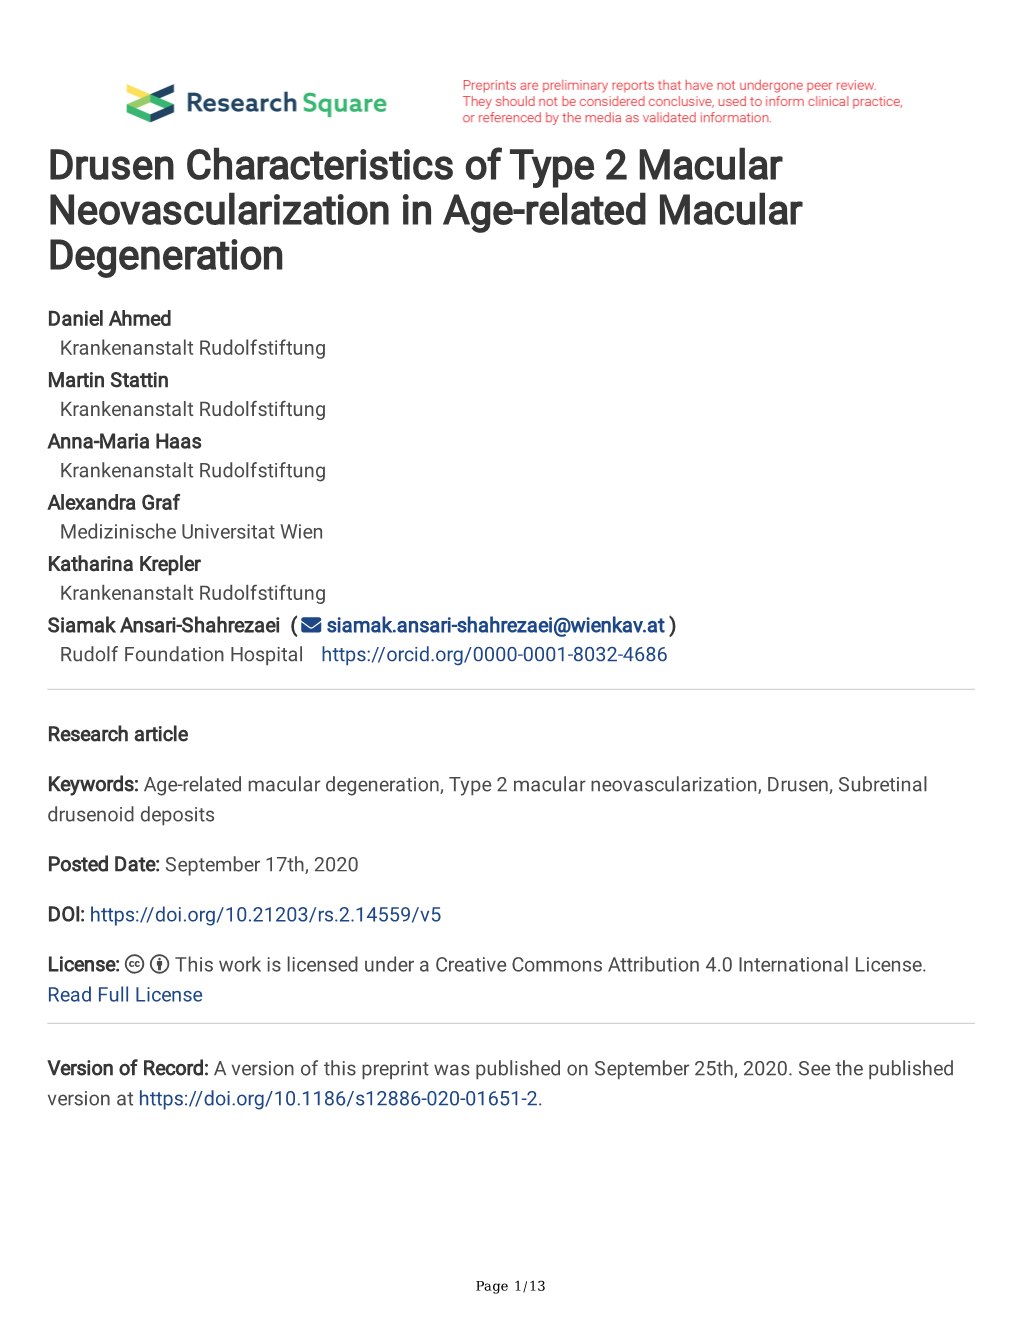 Drusen Characteristics of Type 2 Macular Neovascularization in Age-Related Macular Degeneration